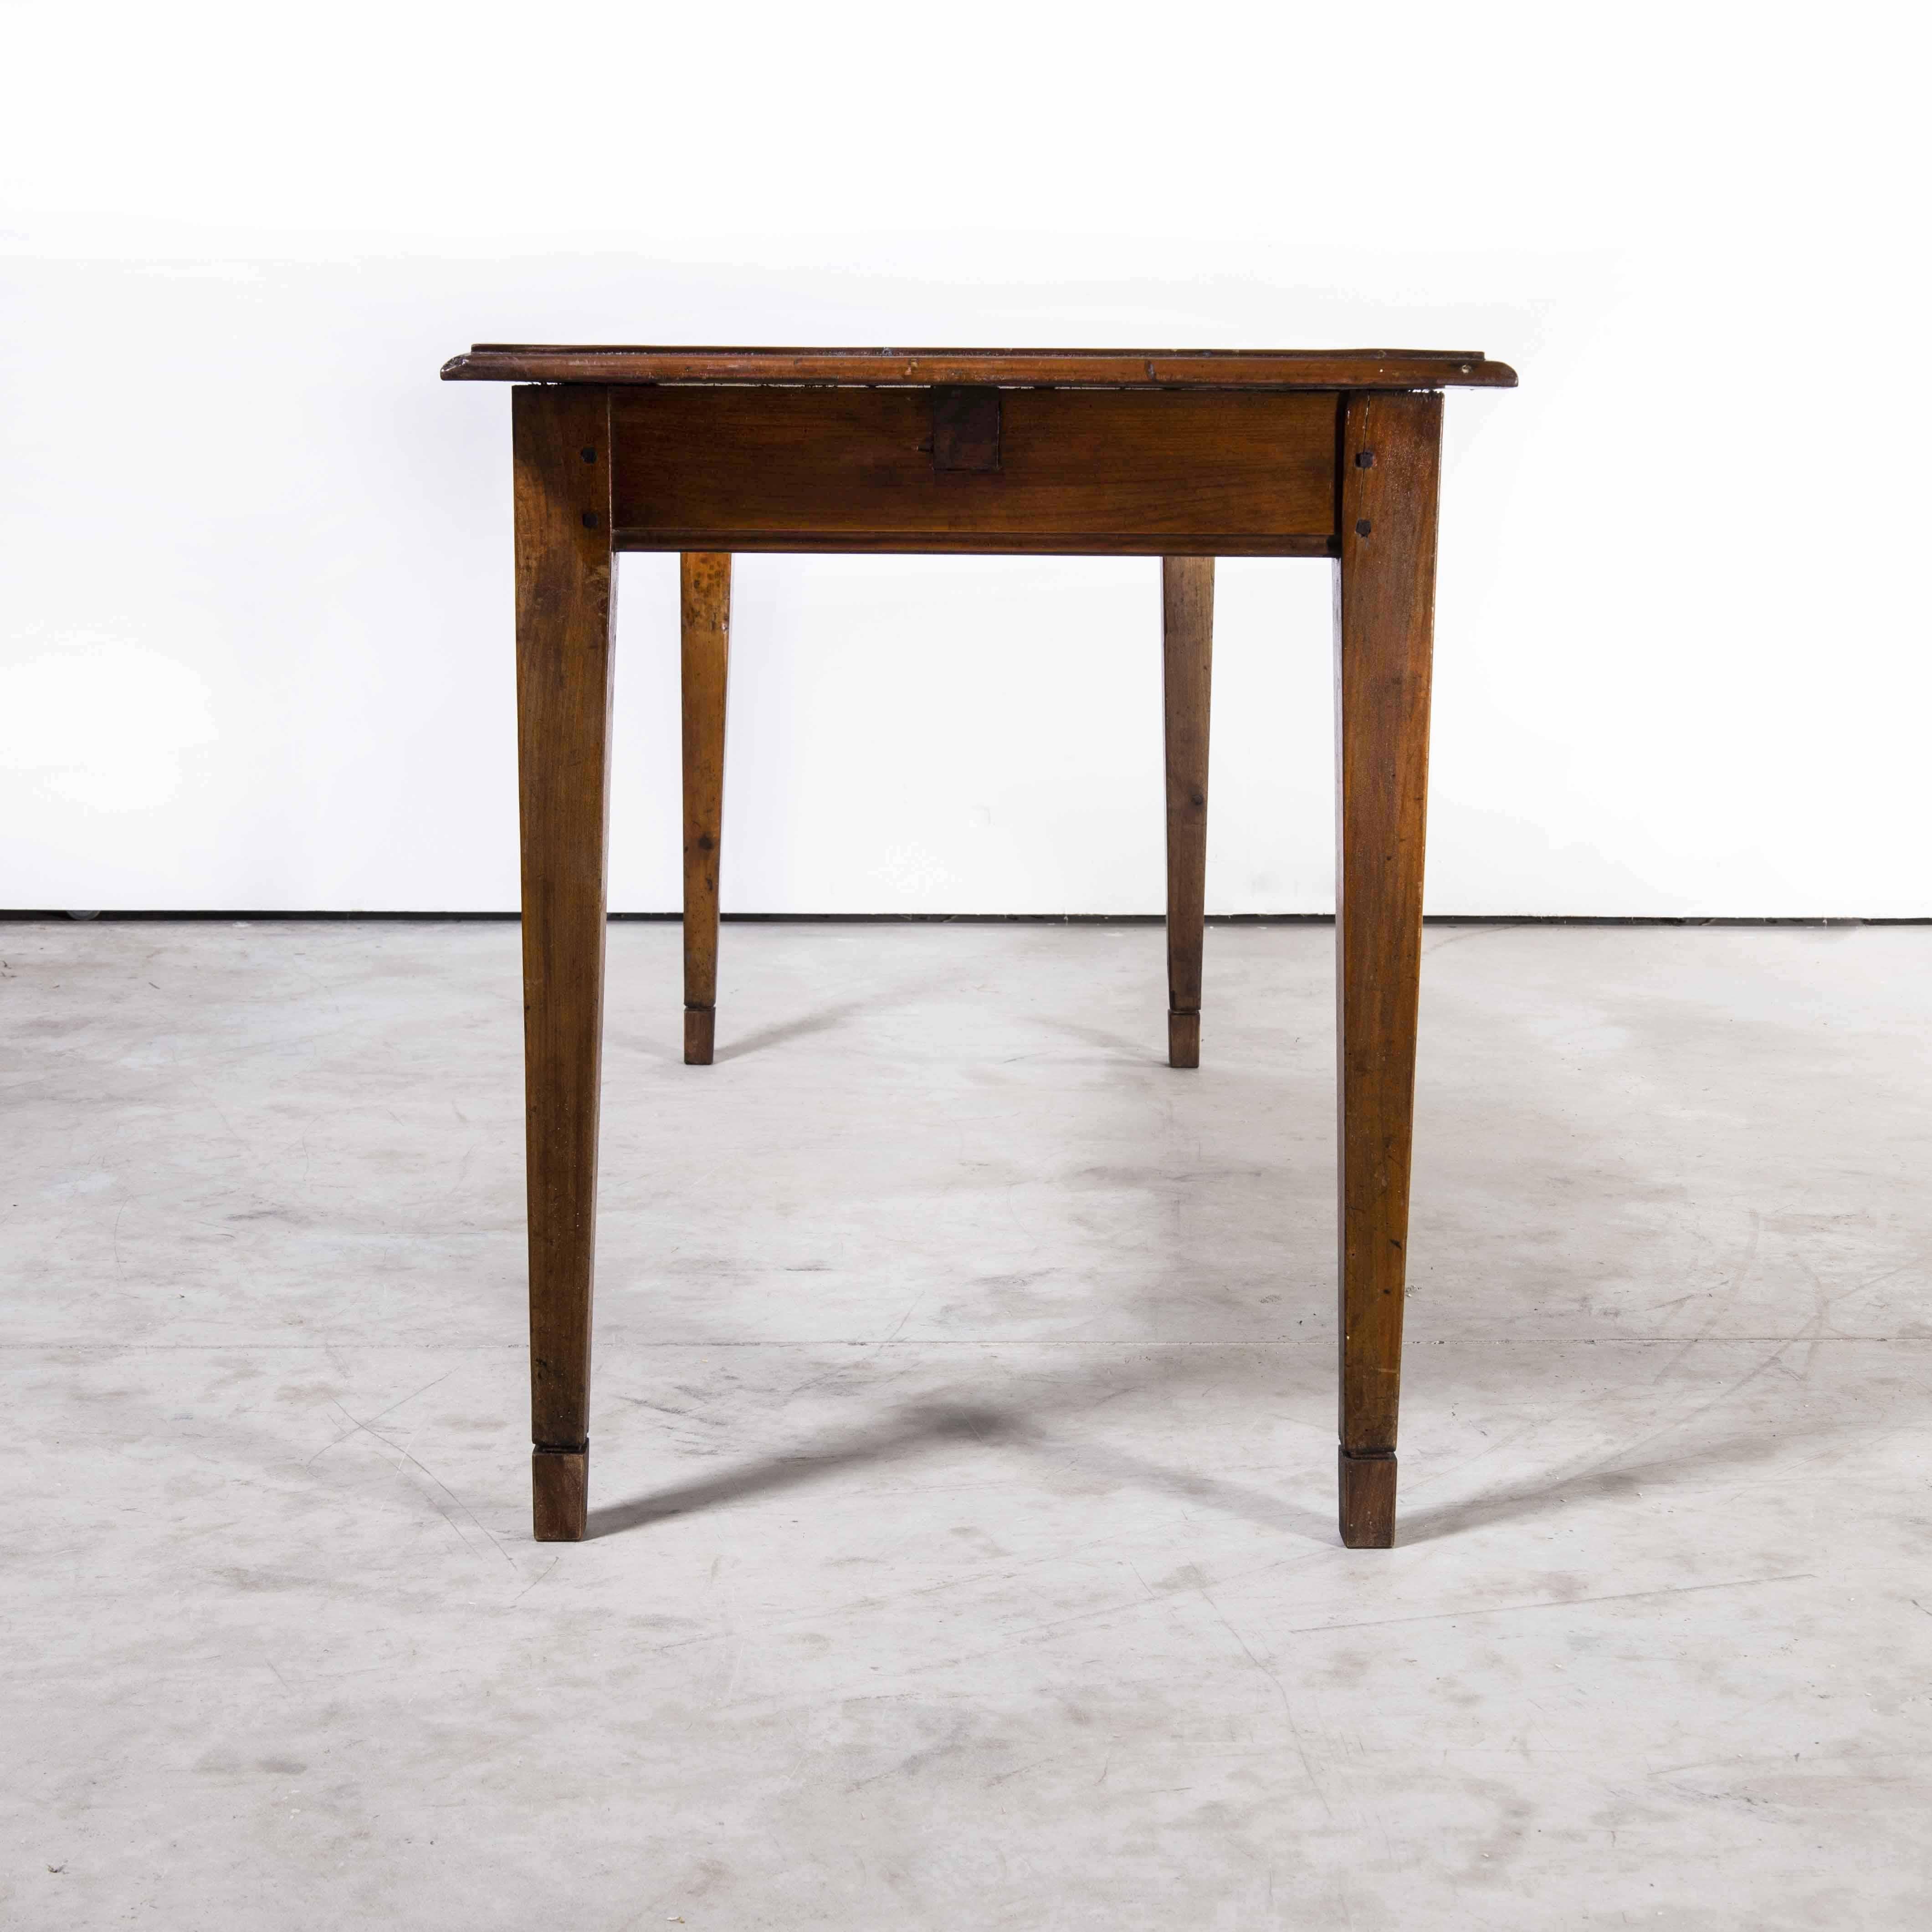 Mid-20th Century 1950’s French Pear Wood Rectangular Dining Table, 'Model 1'